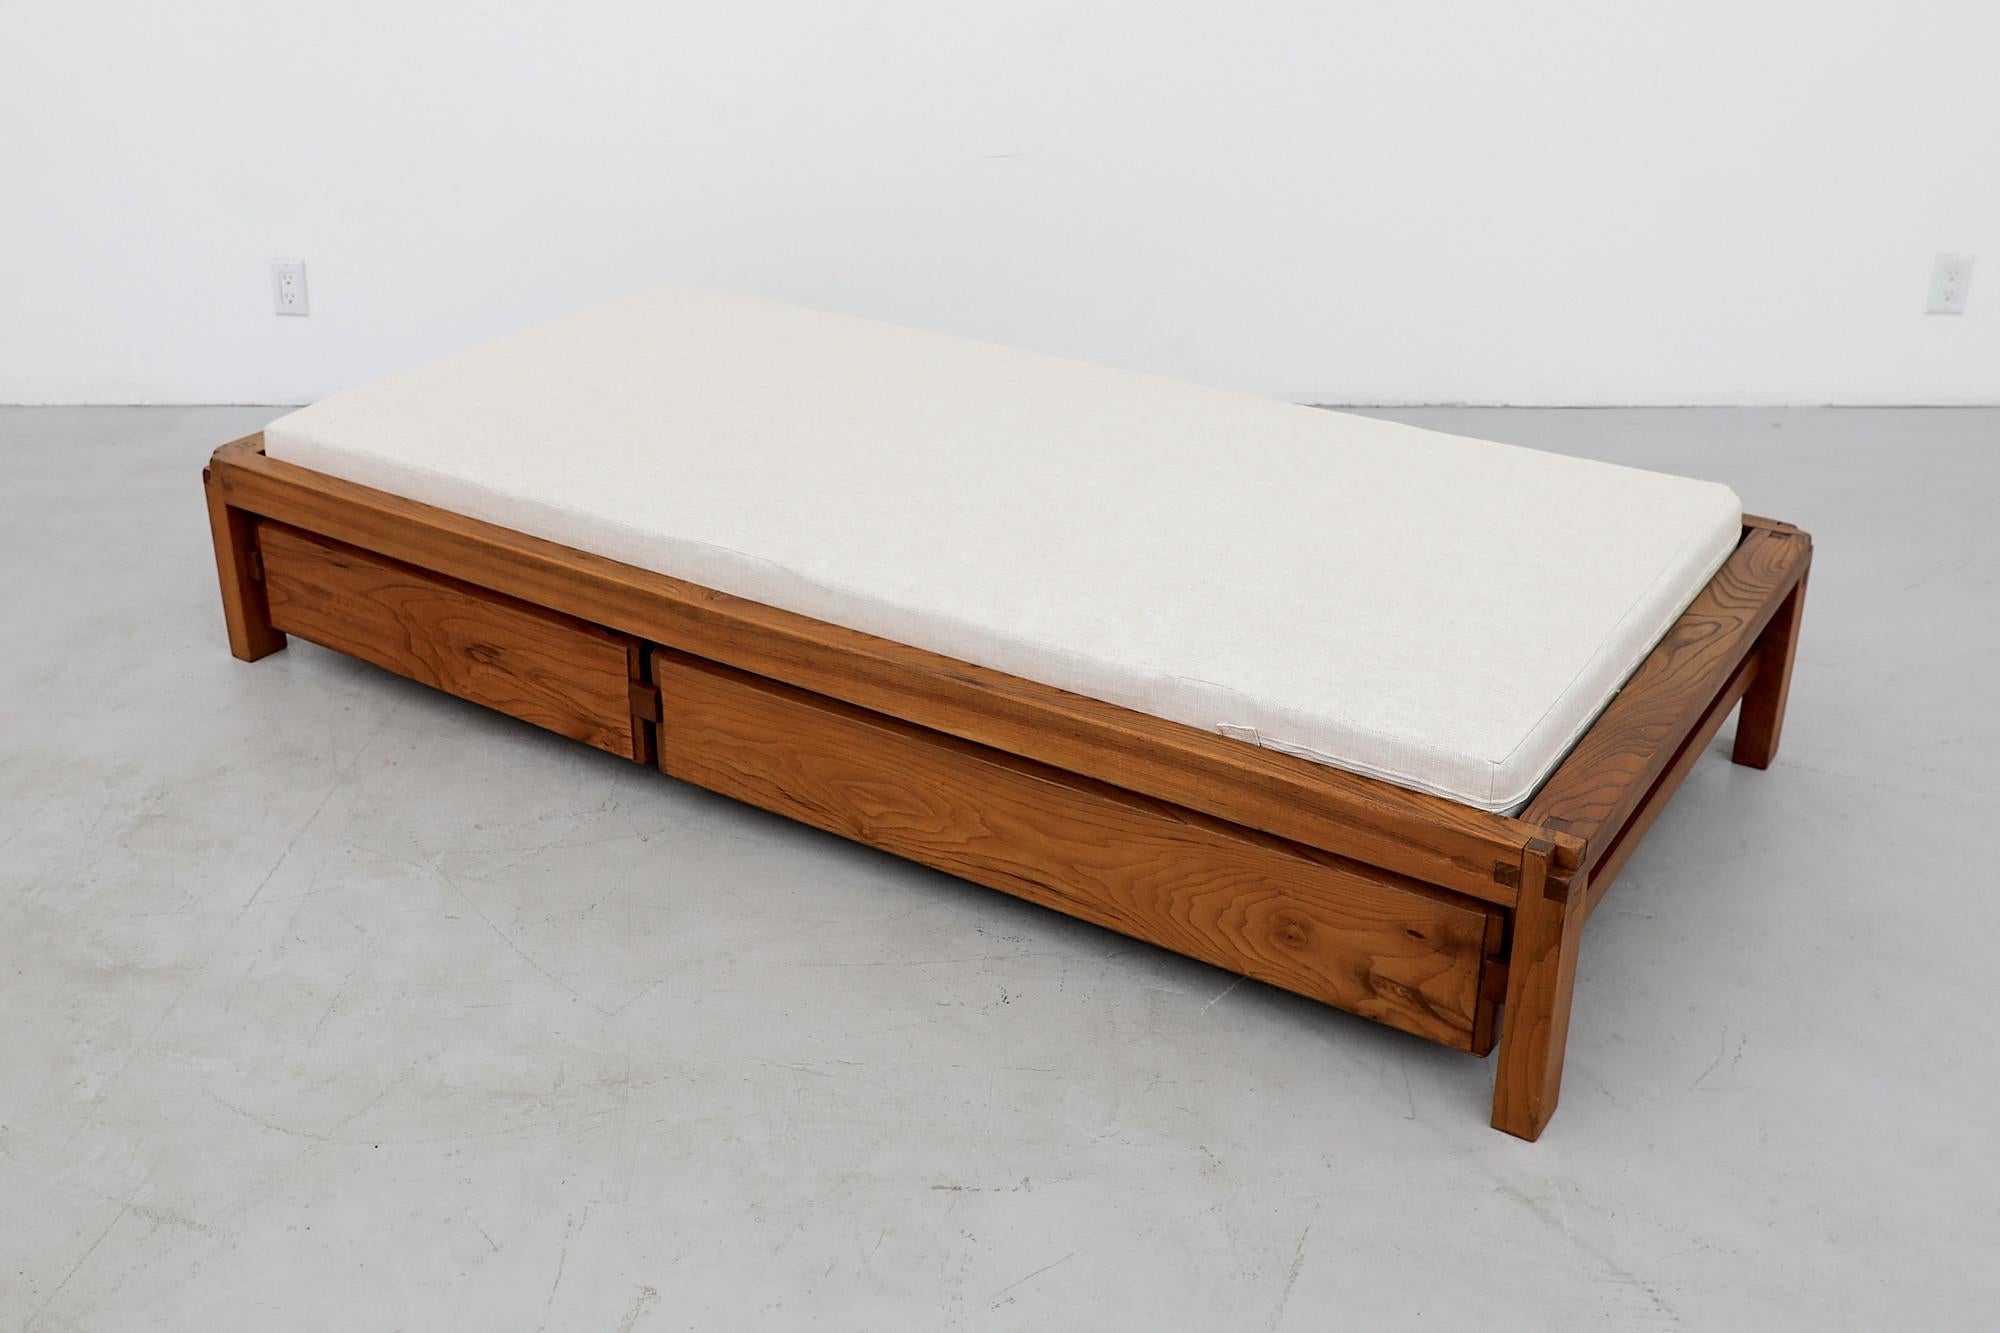 Pierre Chapo 'L03' Daybed in Elm with Storage & Newly Made Mattress, 1960s For Sale 6